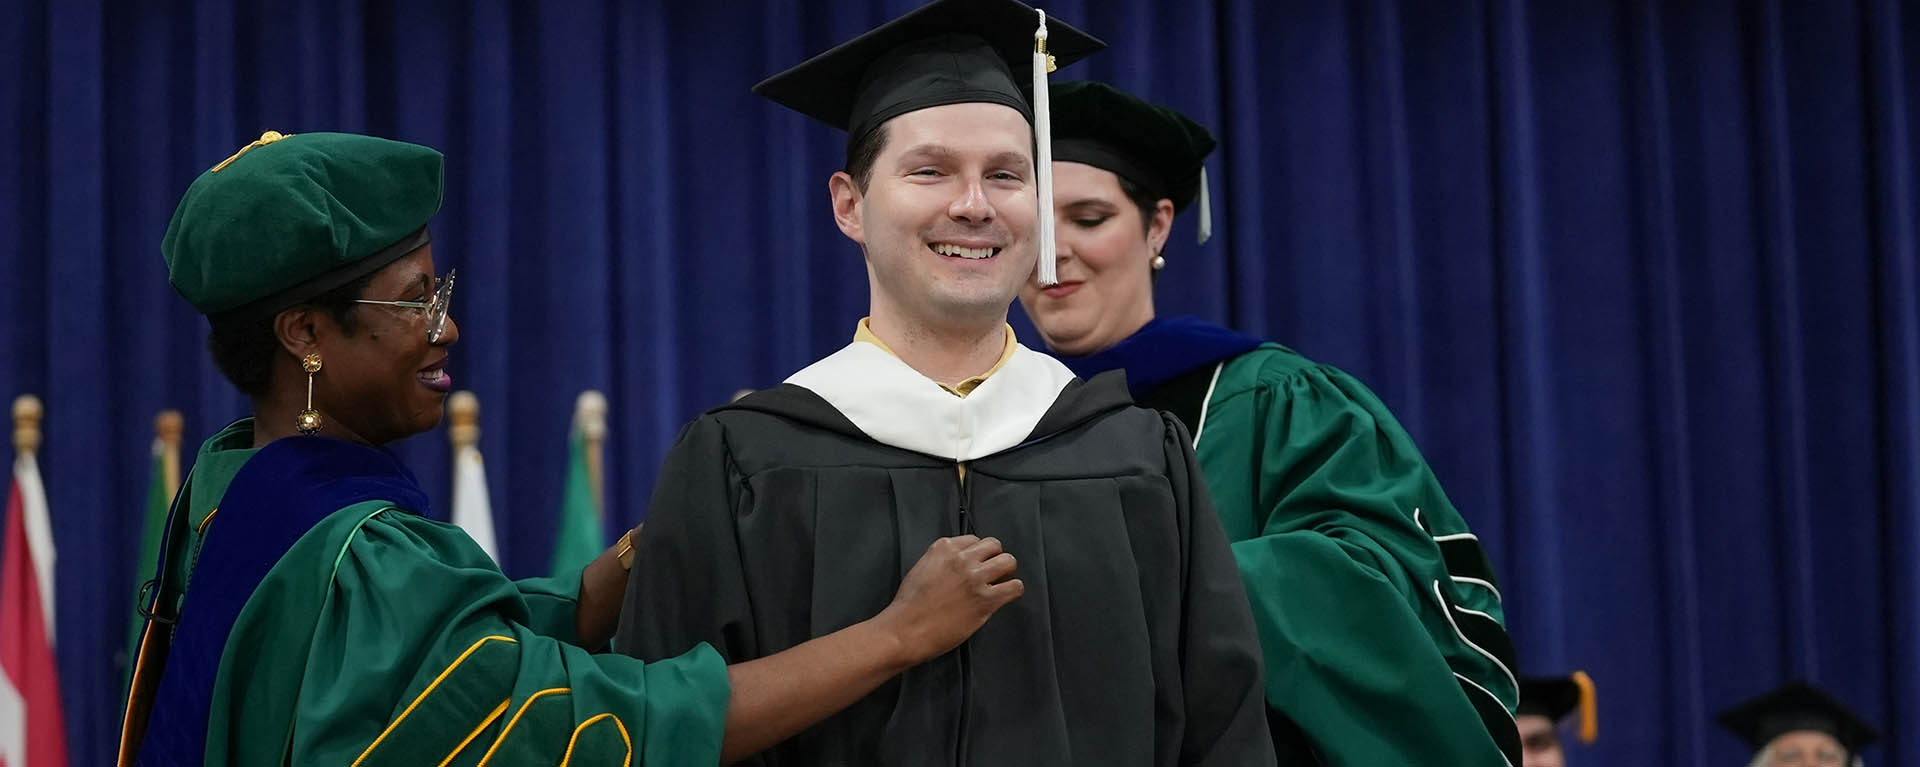 A graduate student smiles while receiving their hood at graduation.